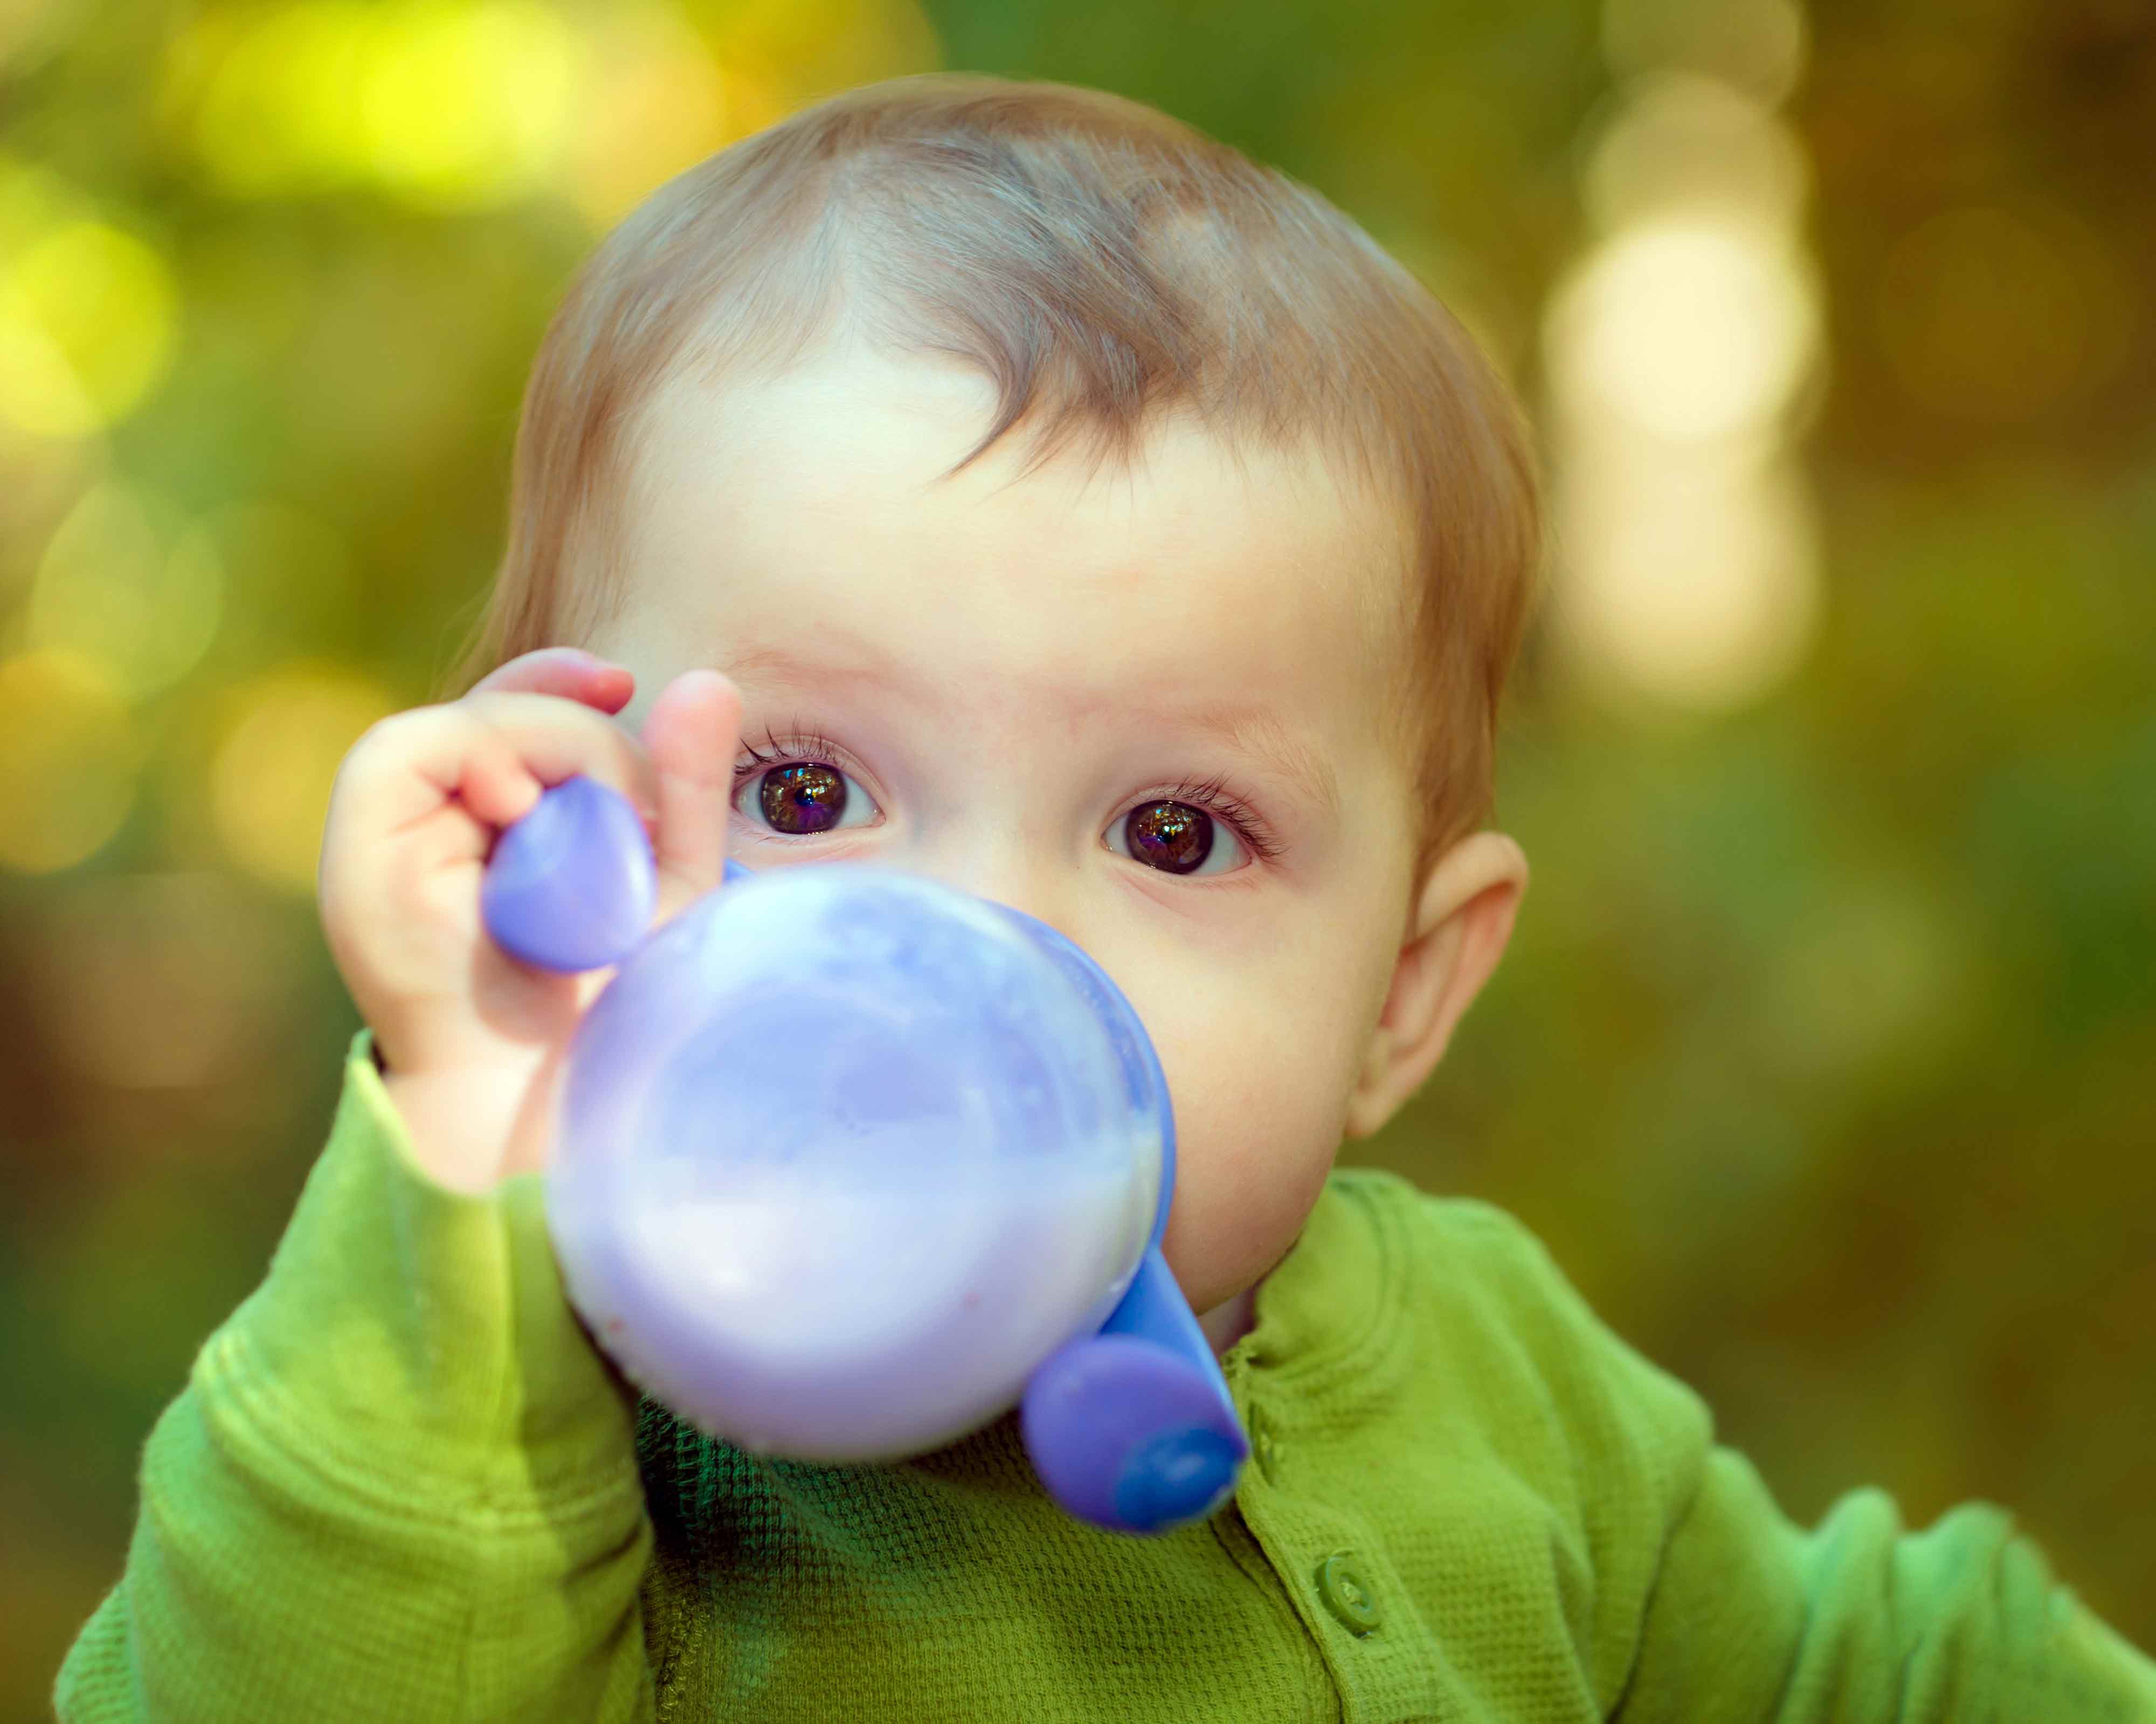 How To Transition Baby to Sippy Cup